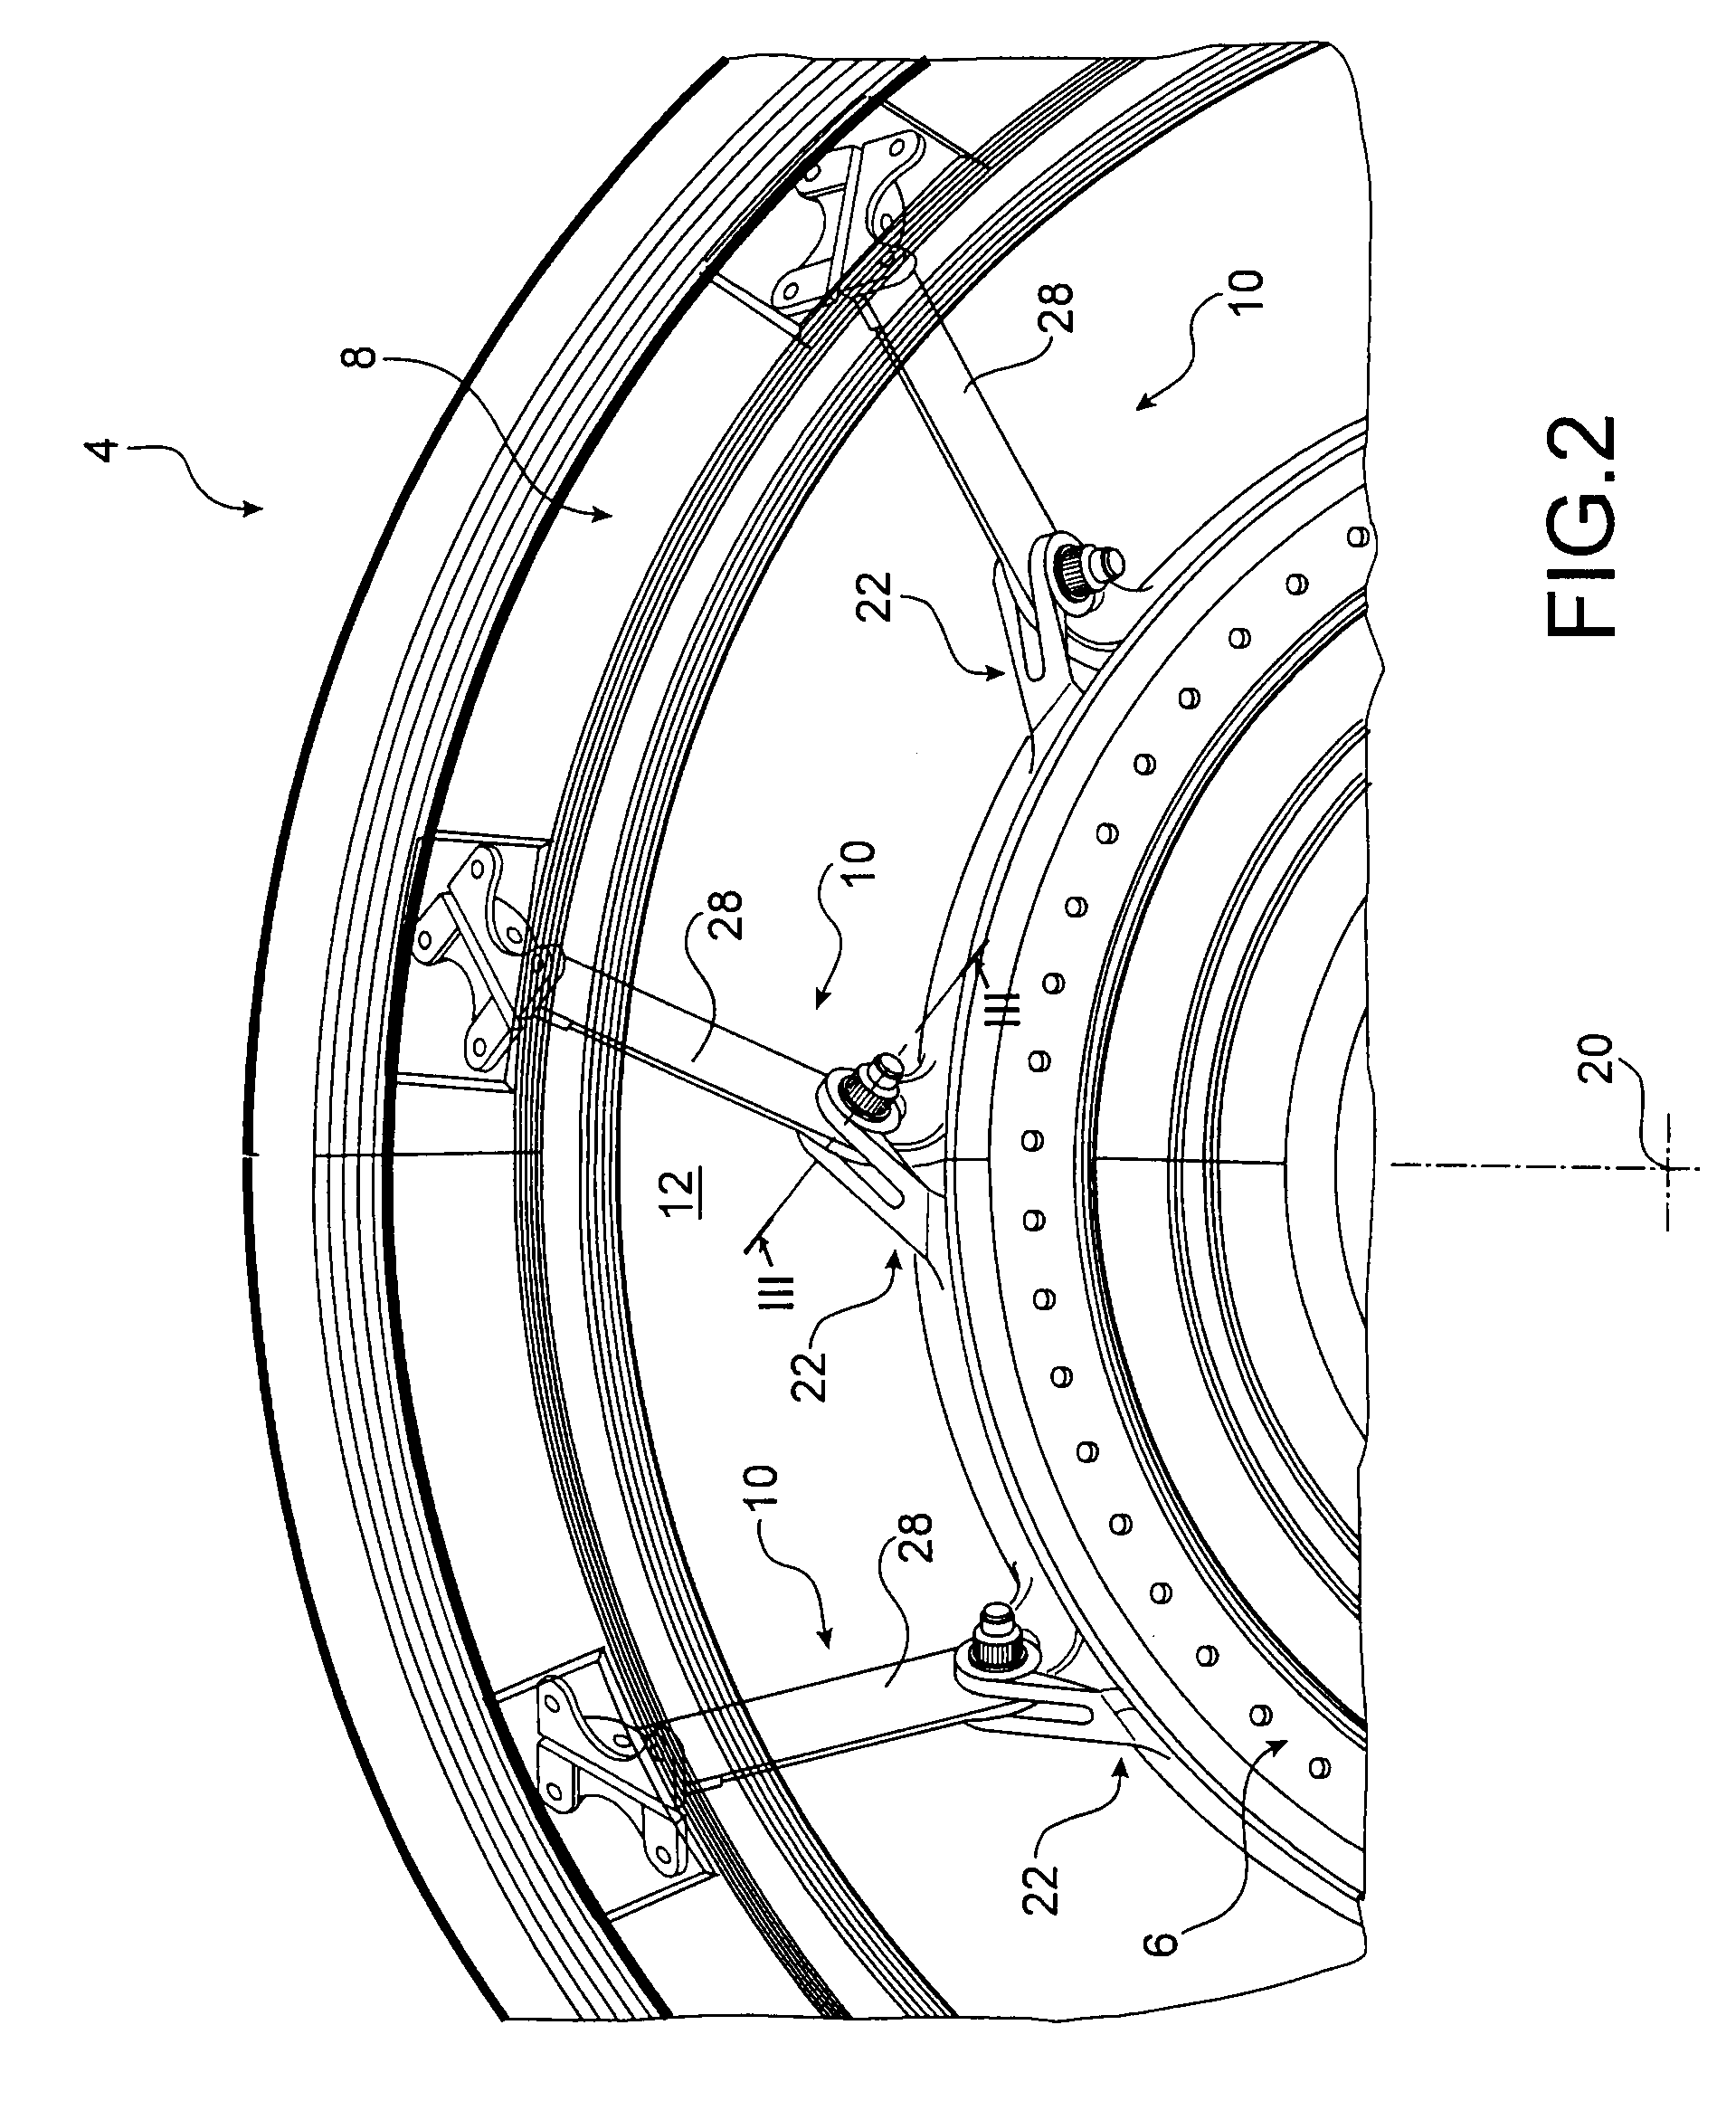 Joining device for joining two assemblies, for example for a stator of a turbomachine